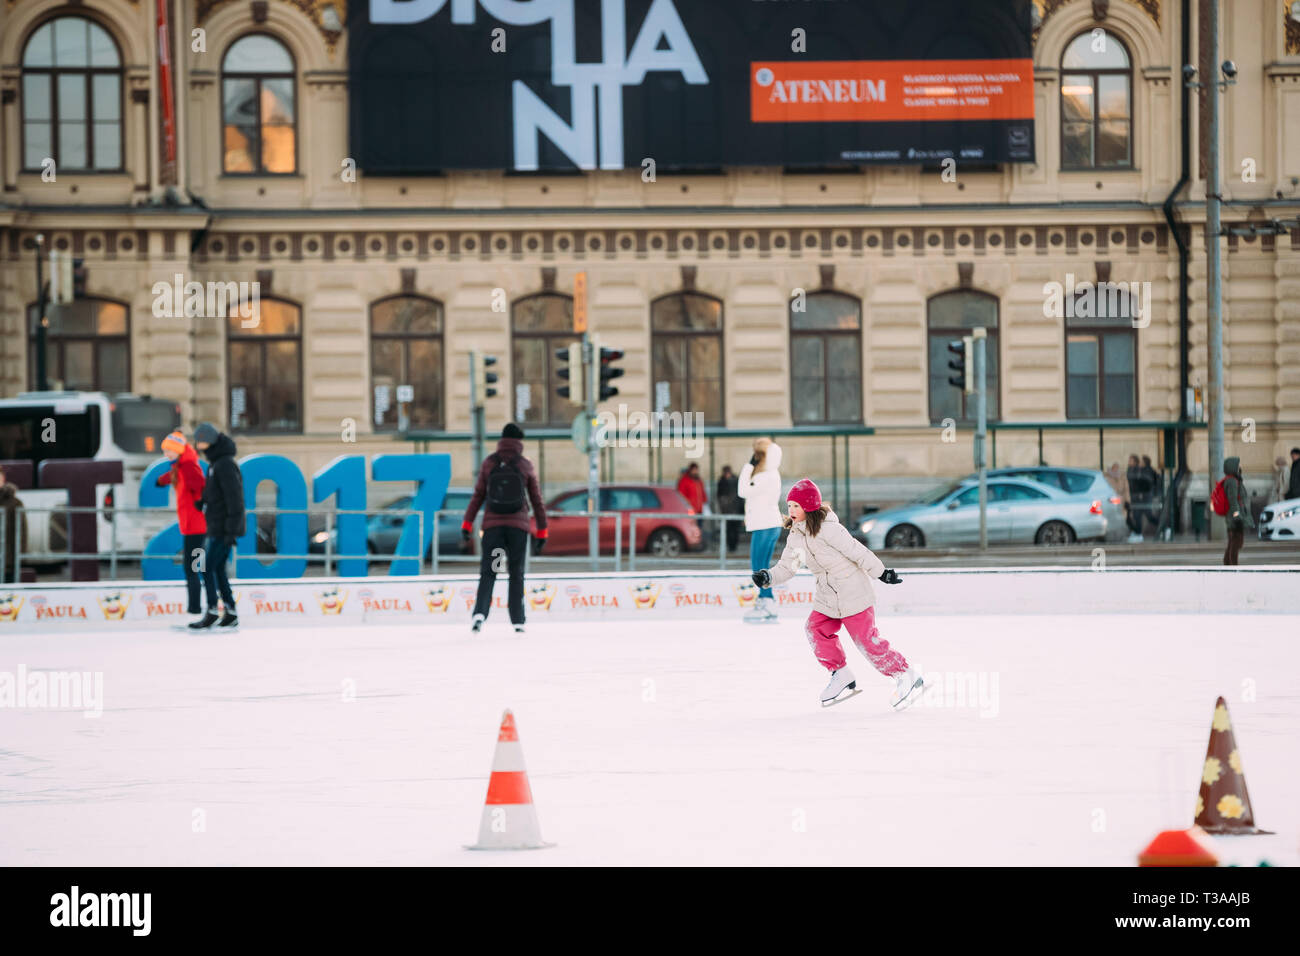 Helsinki, Finland - December 11, 2016: Young People And Children Skating On Rink On Railway Square In Winter Day. Stock Photo